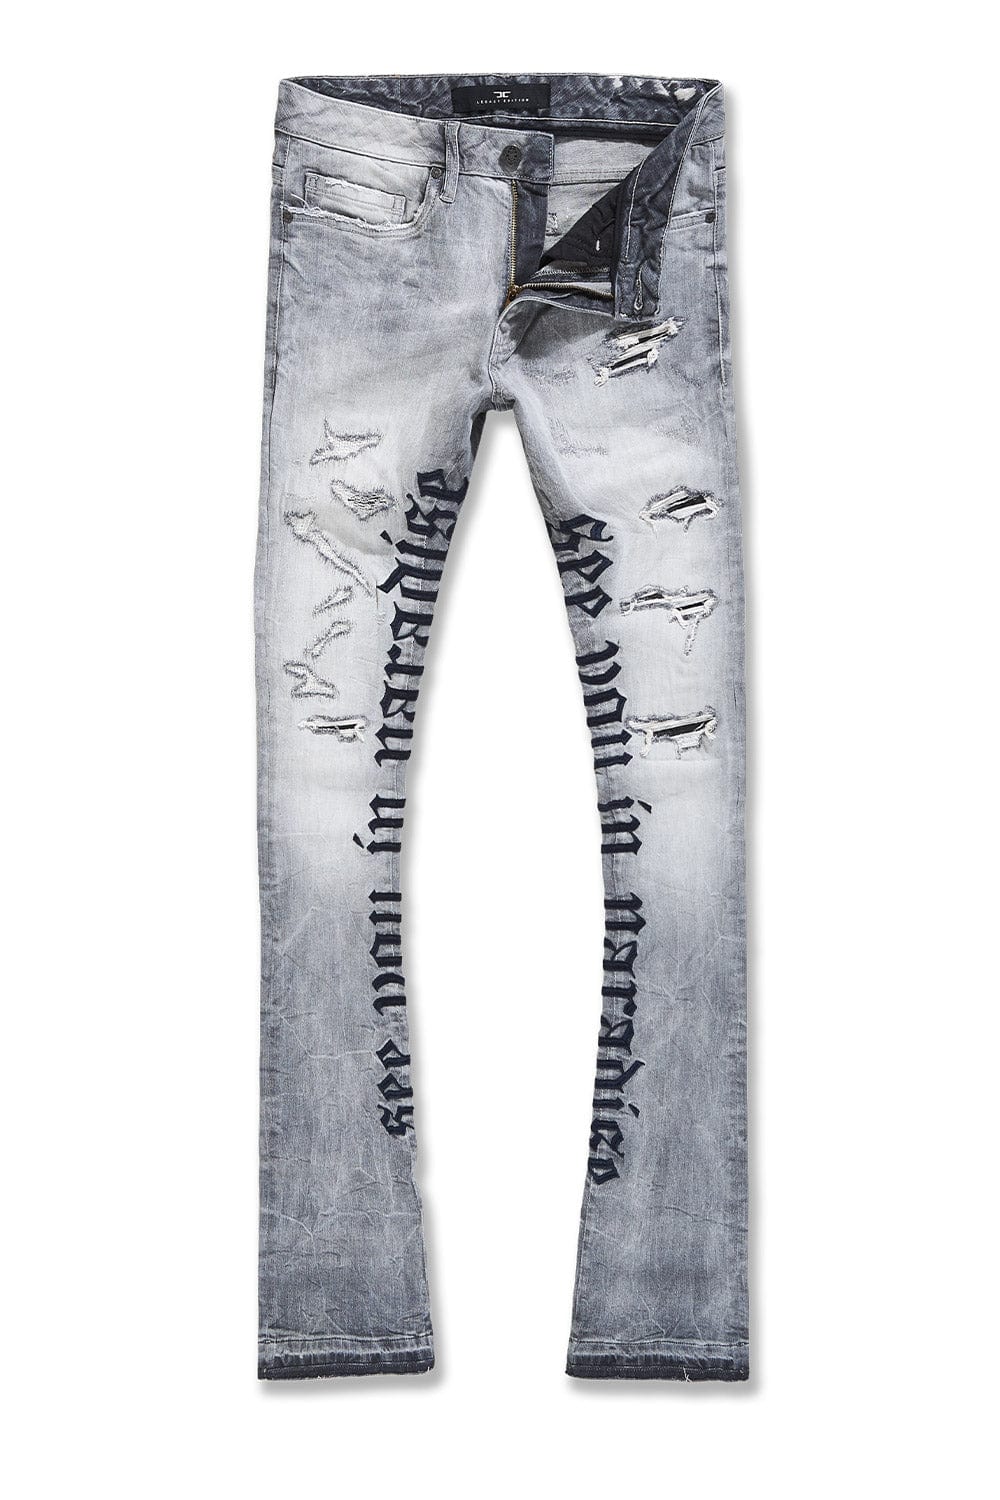 Jordan Craig Martin Stacked - See You In Paradise Denim (Cement) 30 / Cement